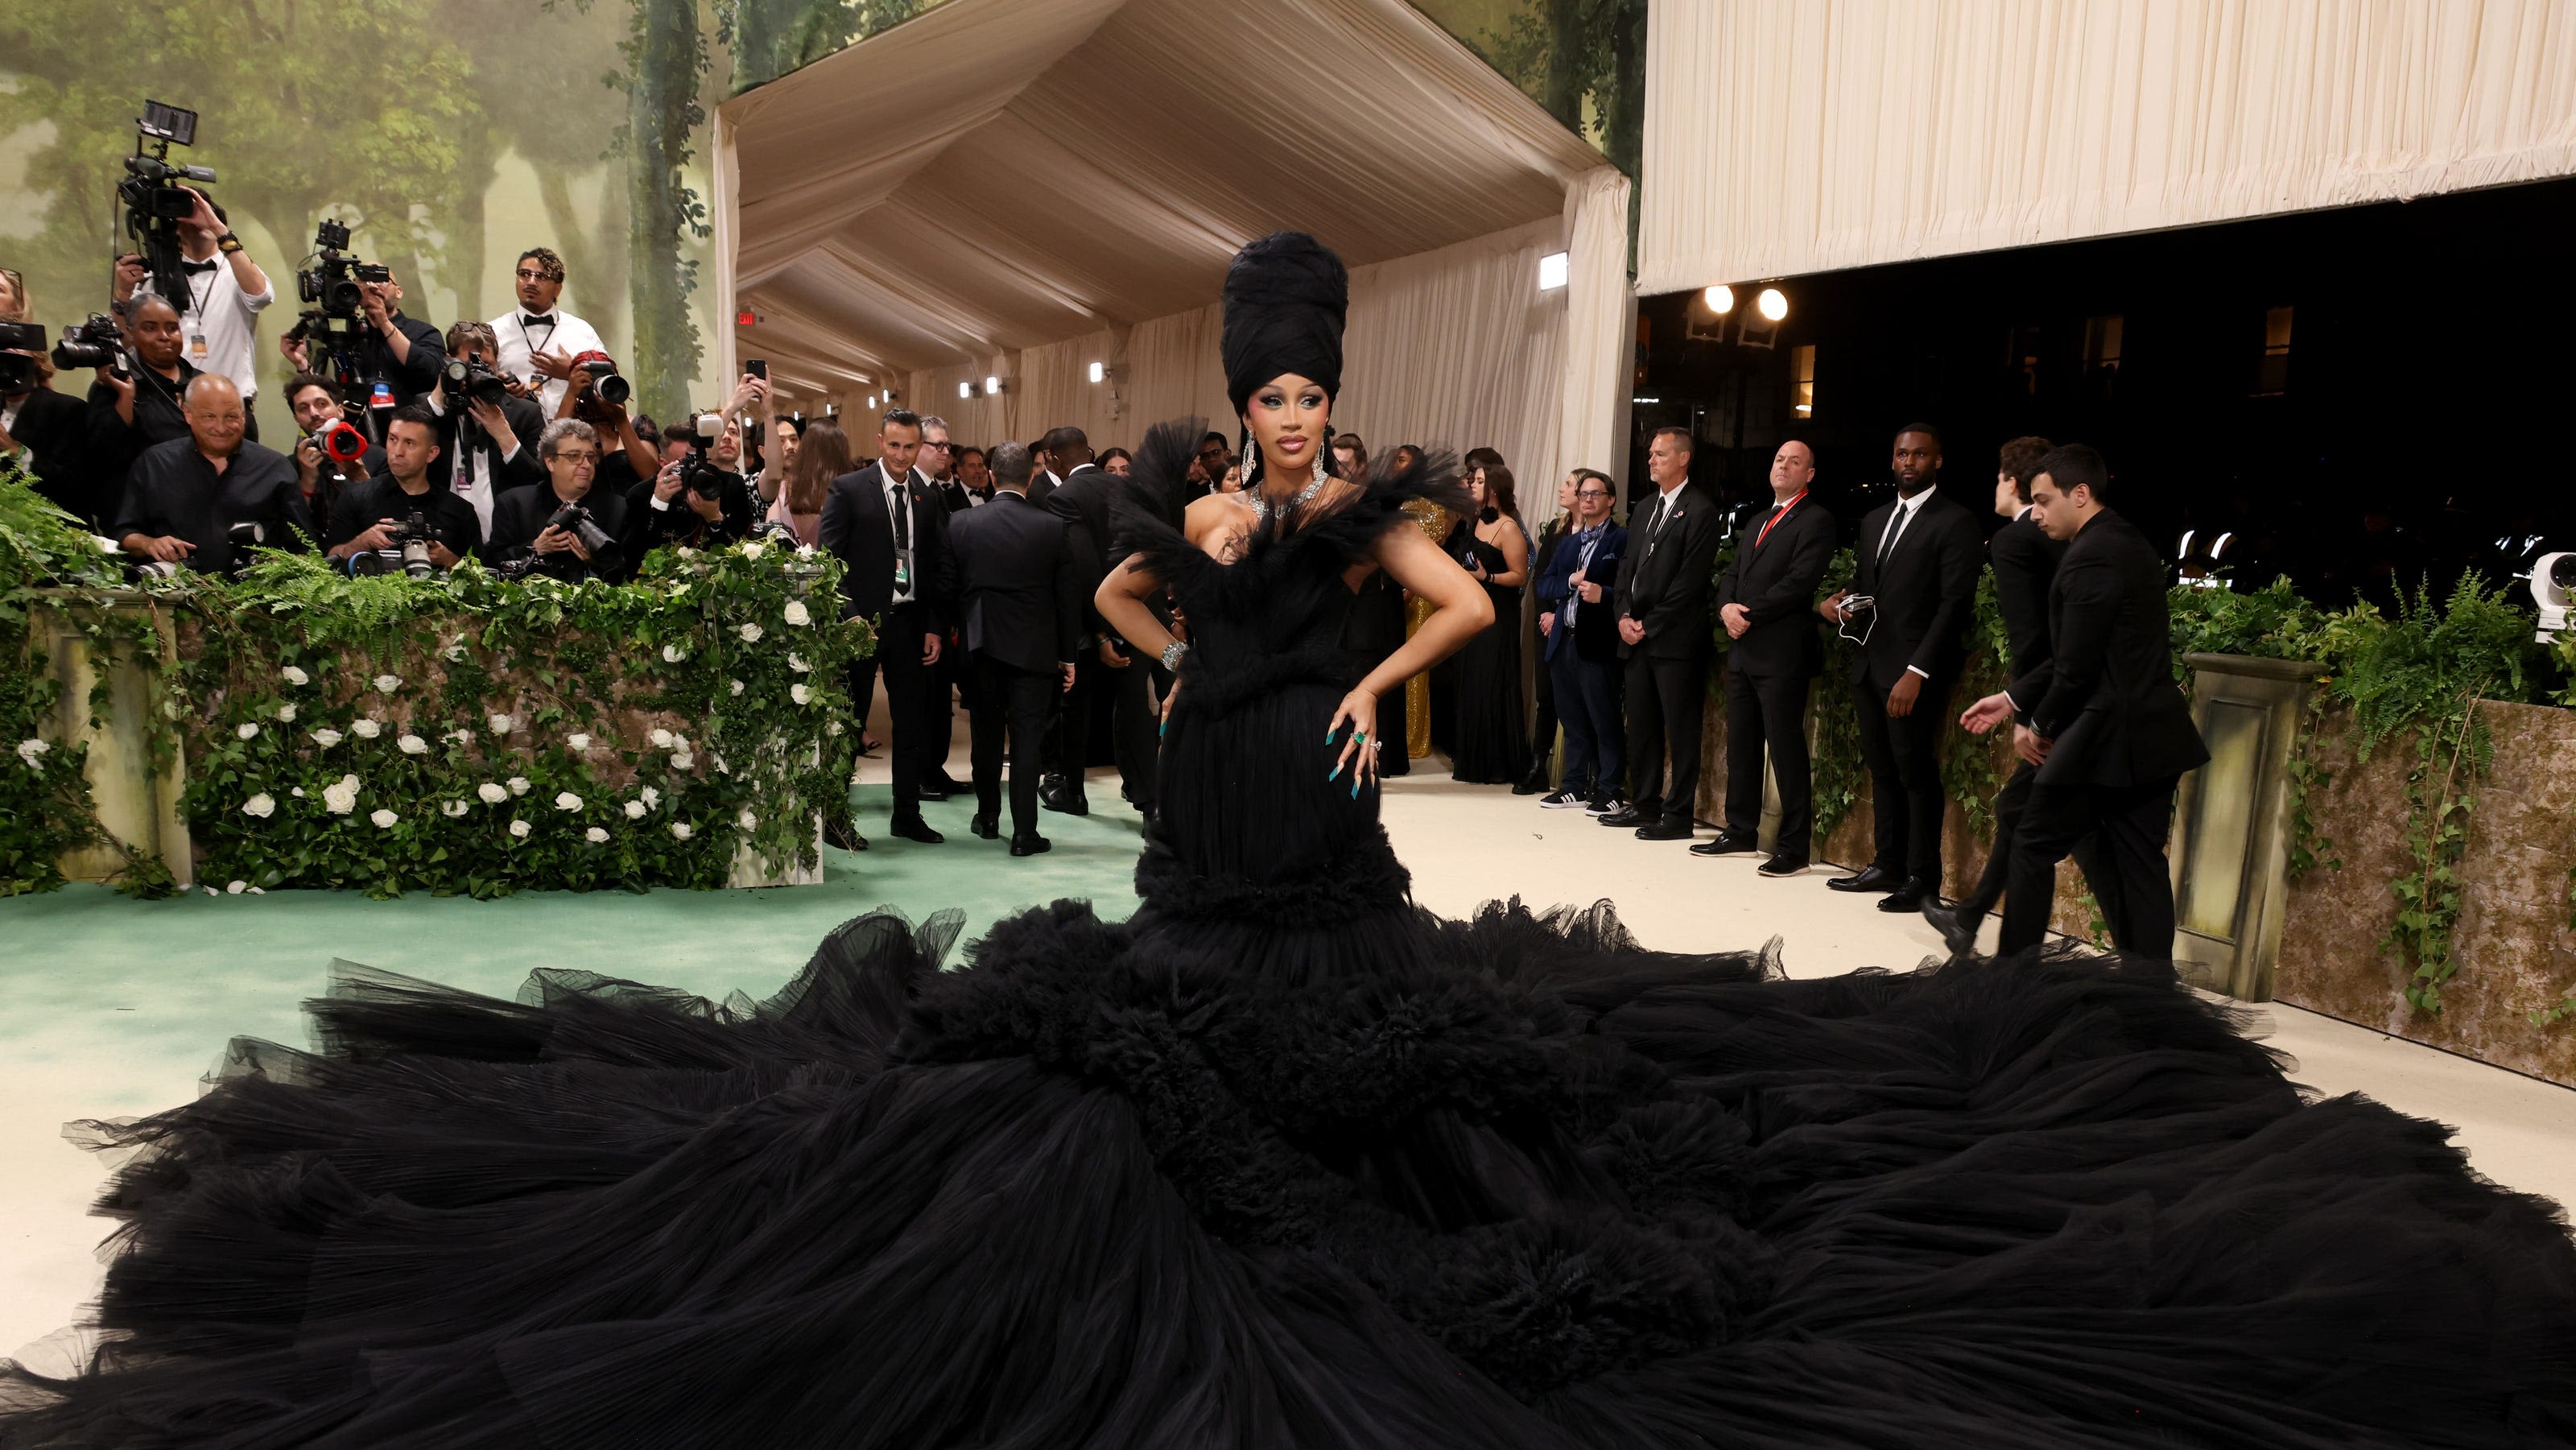 Cardi B addresses Met Gala backlash after referring to designer as 'Asian' instead of their name